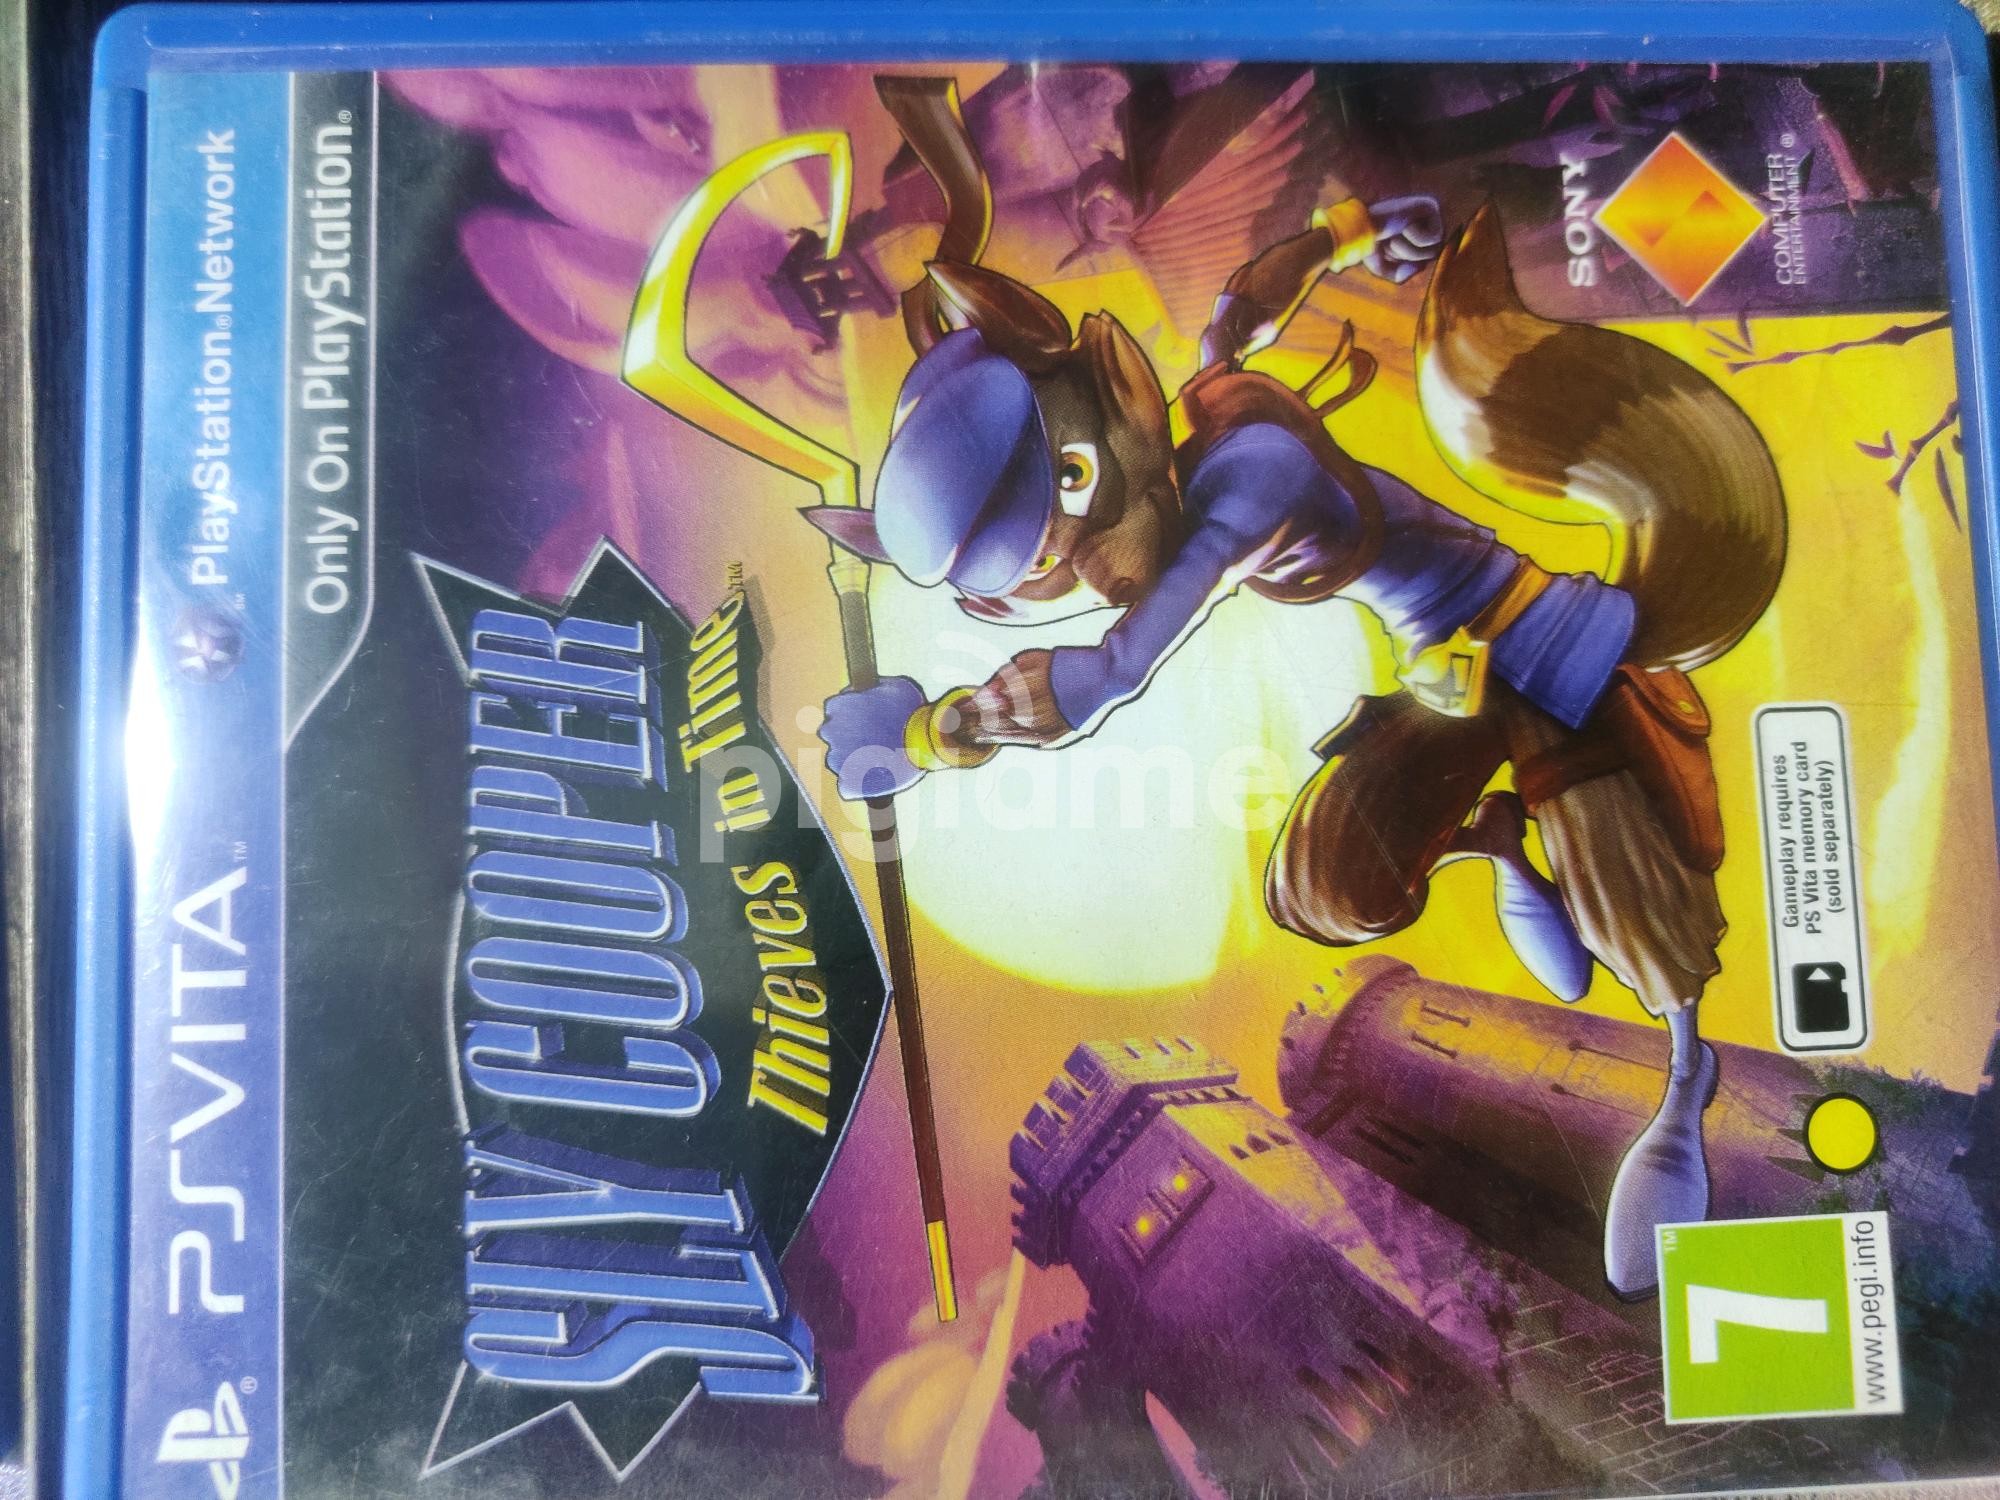 sly cooper thieves in time vita